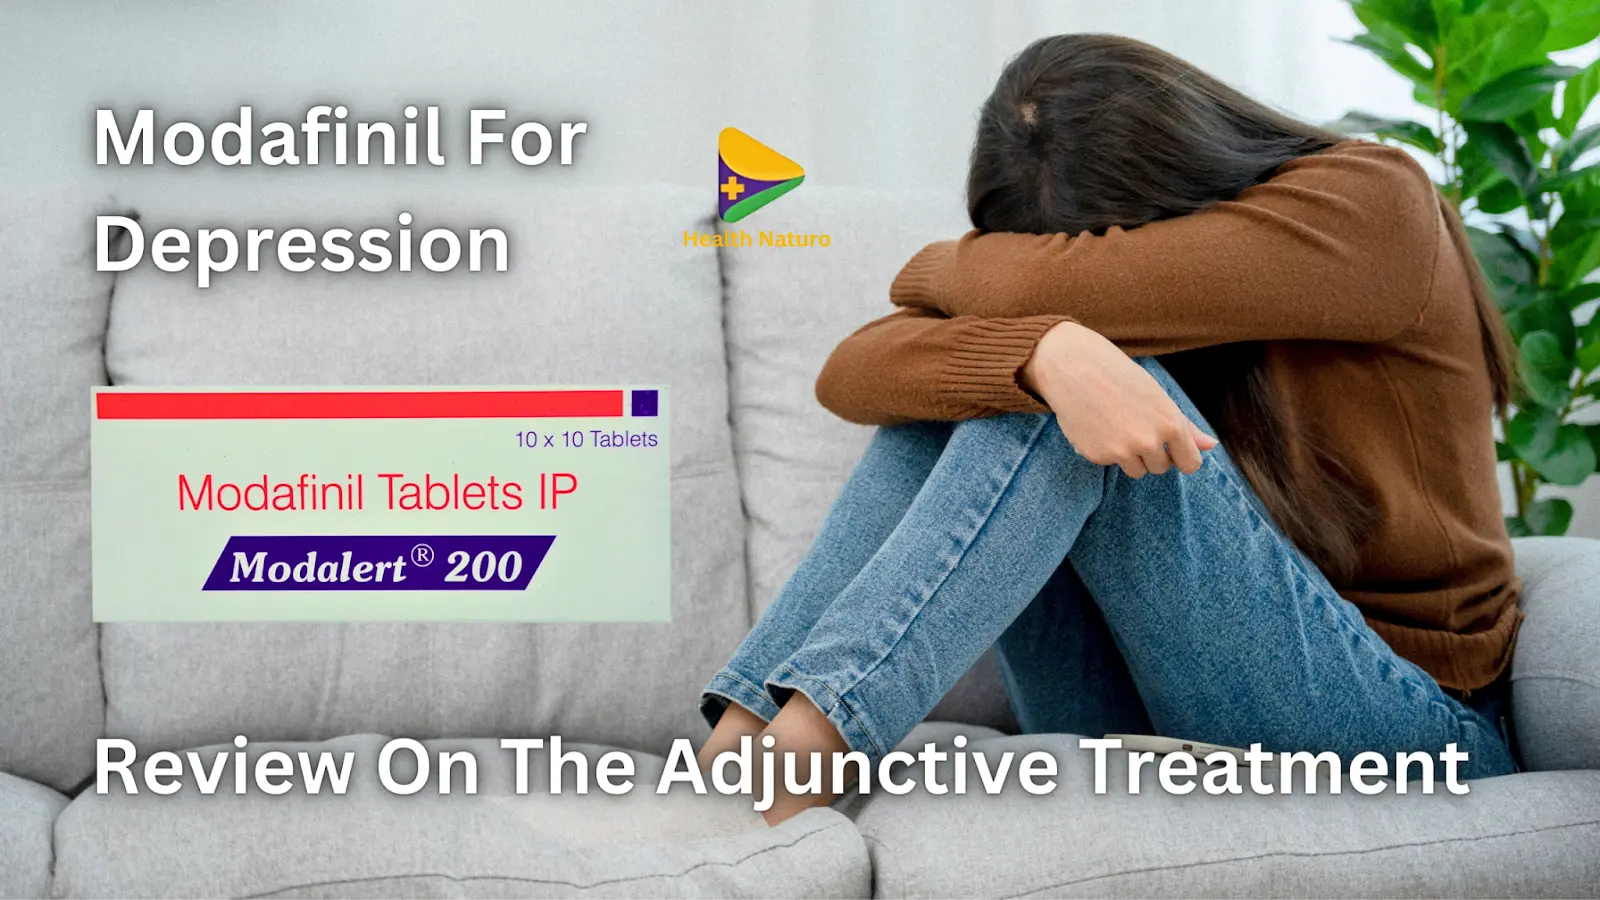 Modafinil For Depression- Review On The Adjunctive Treatment